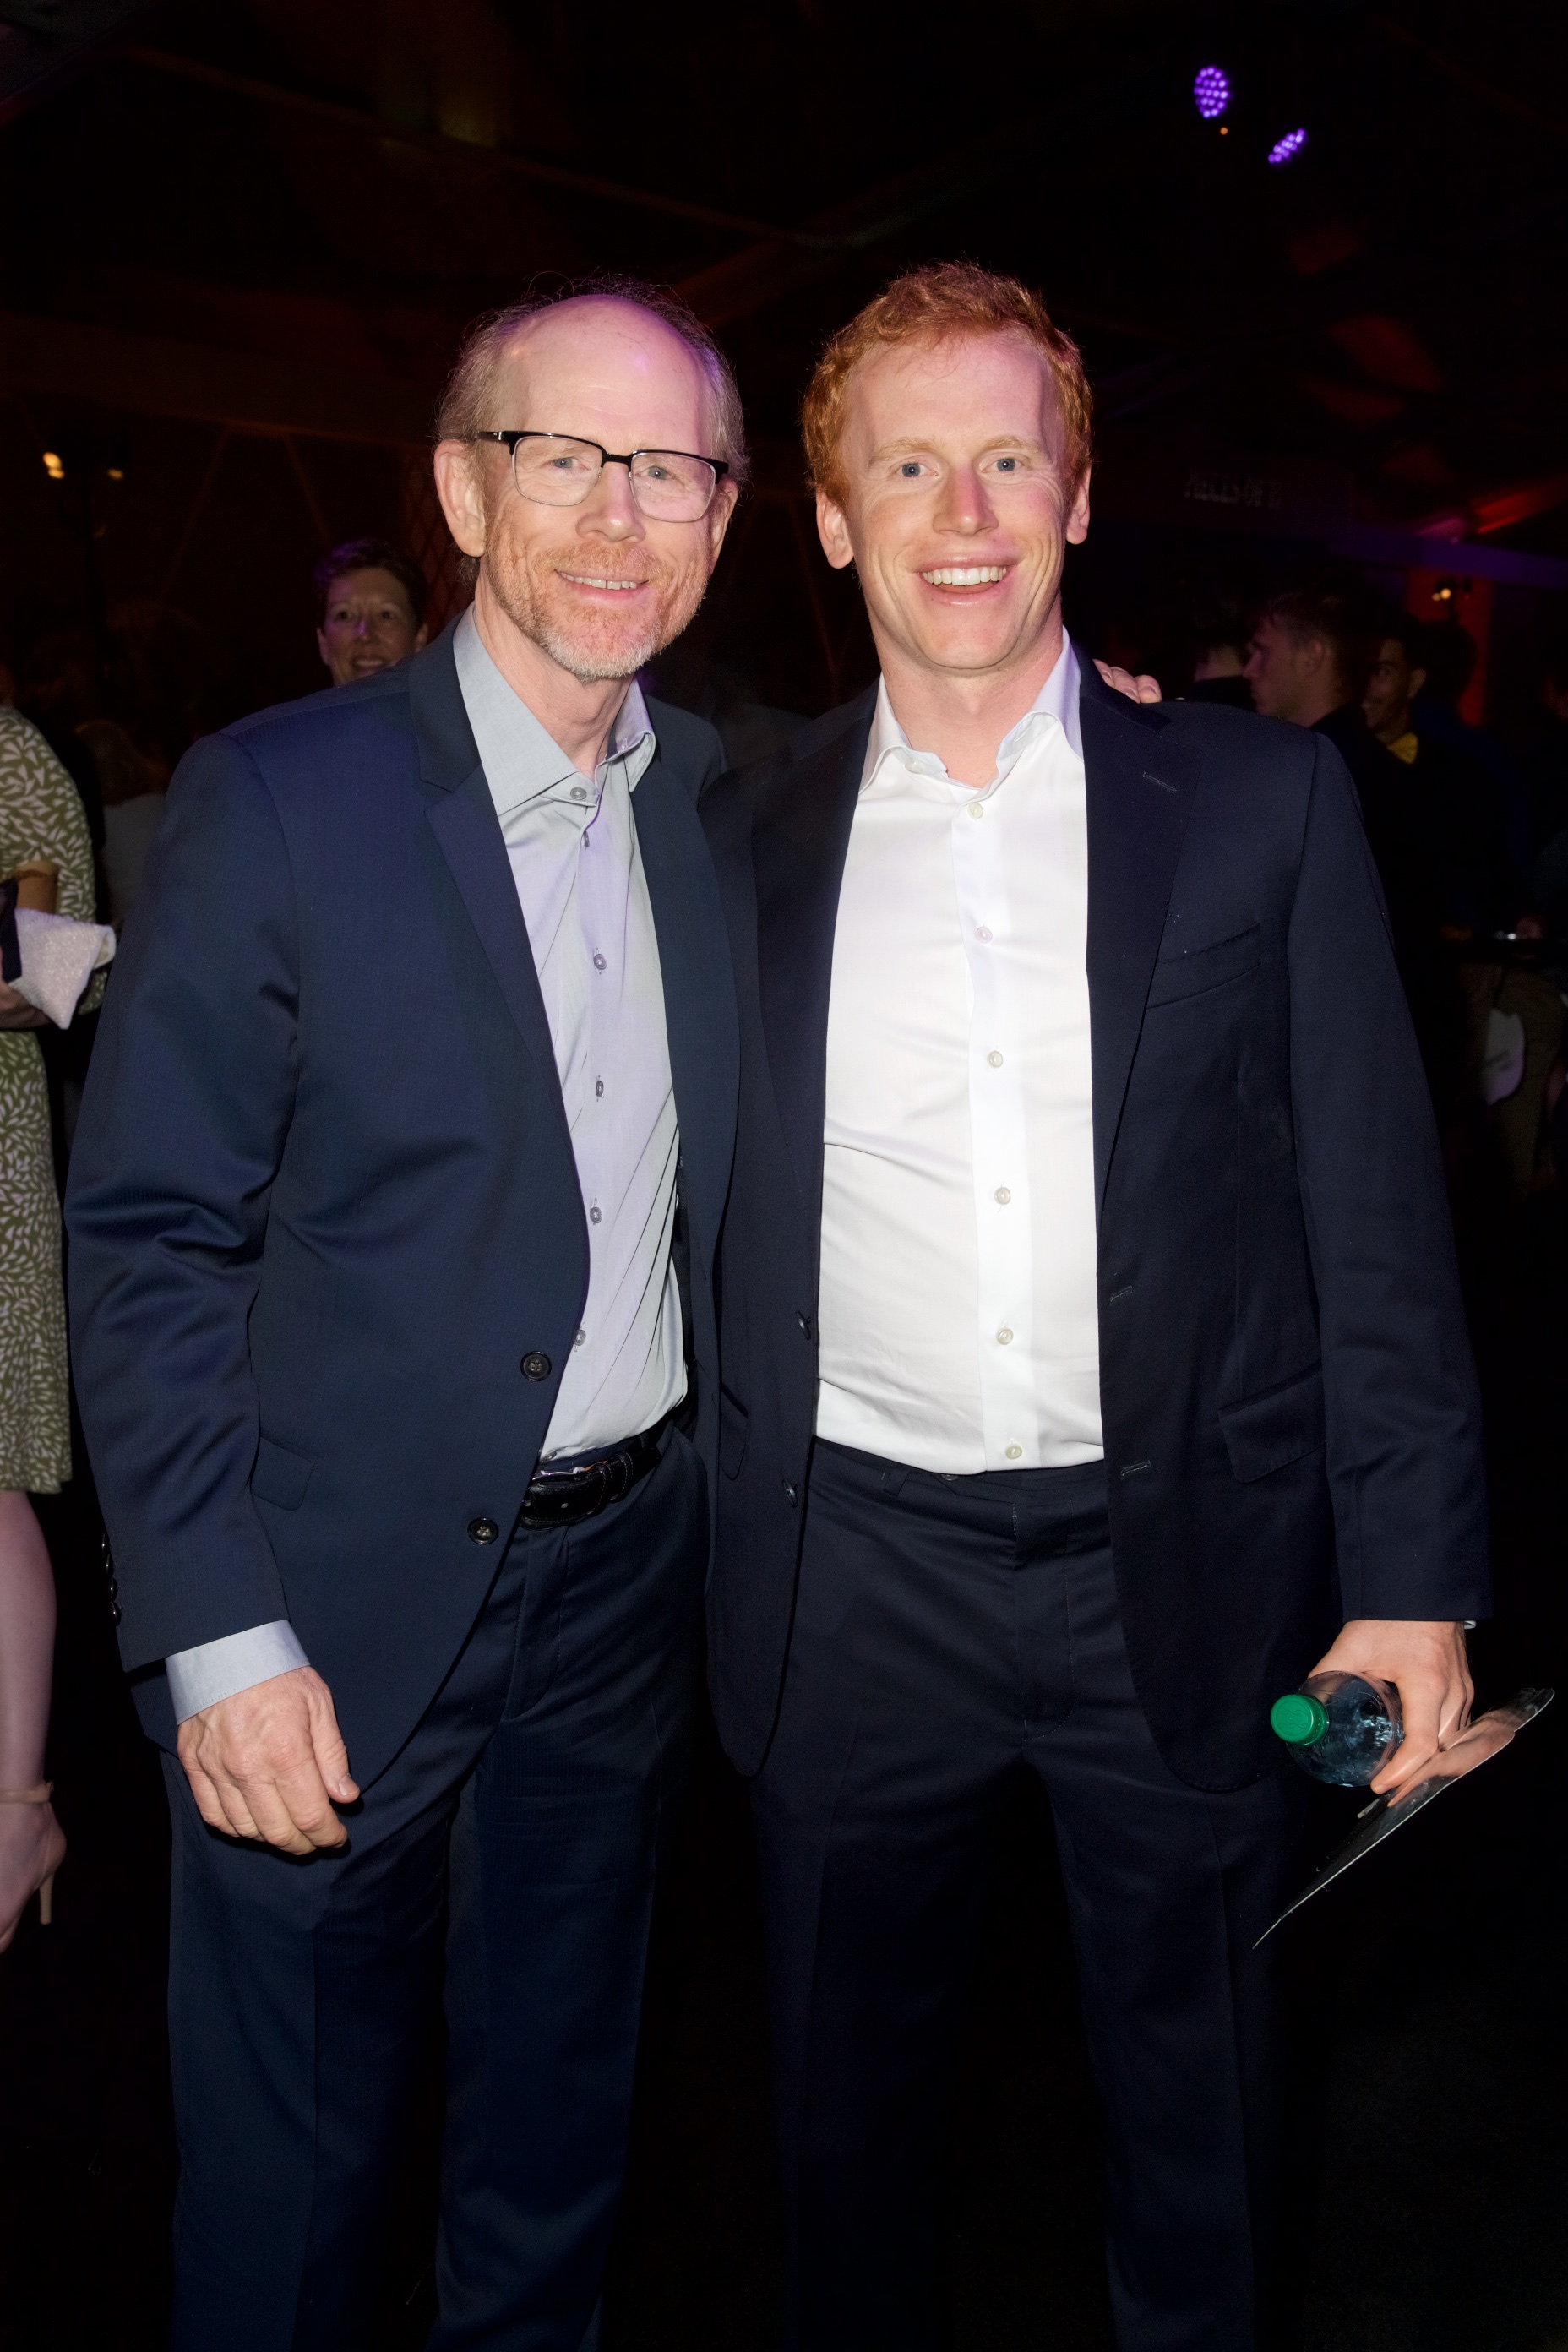 Ron Howard and son Reed Howard at the after-party of the premiere of "Genius" on April 24, 2017 in Los Angeles, California | Source: Getty Images